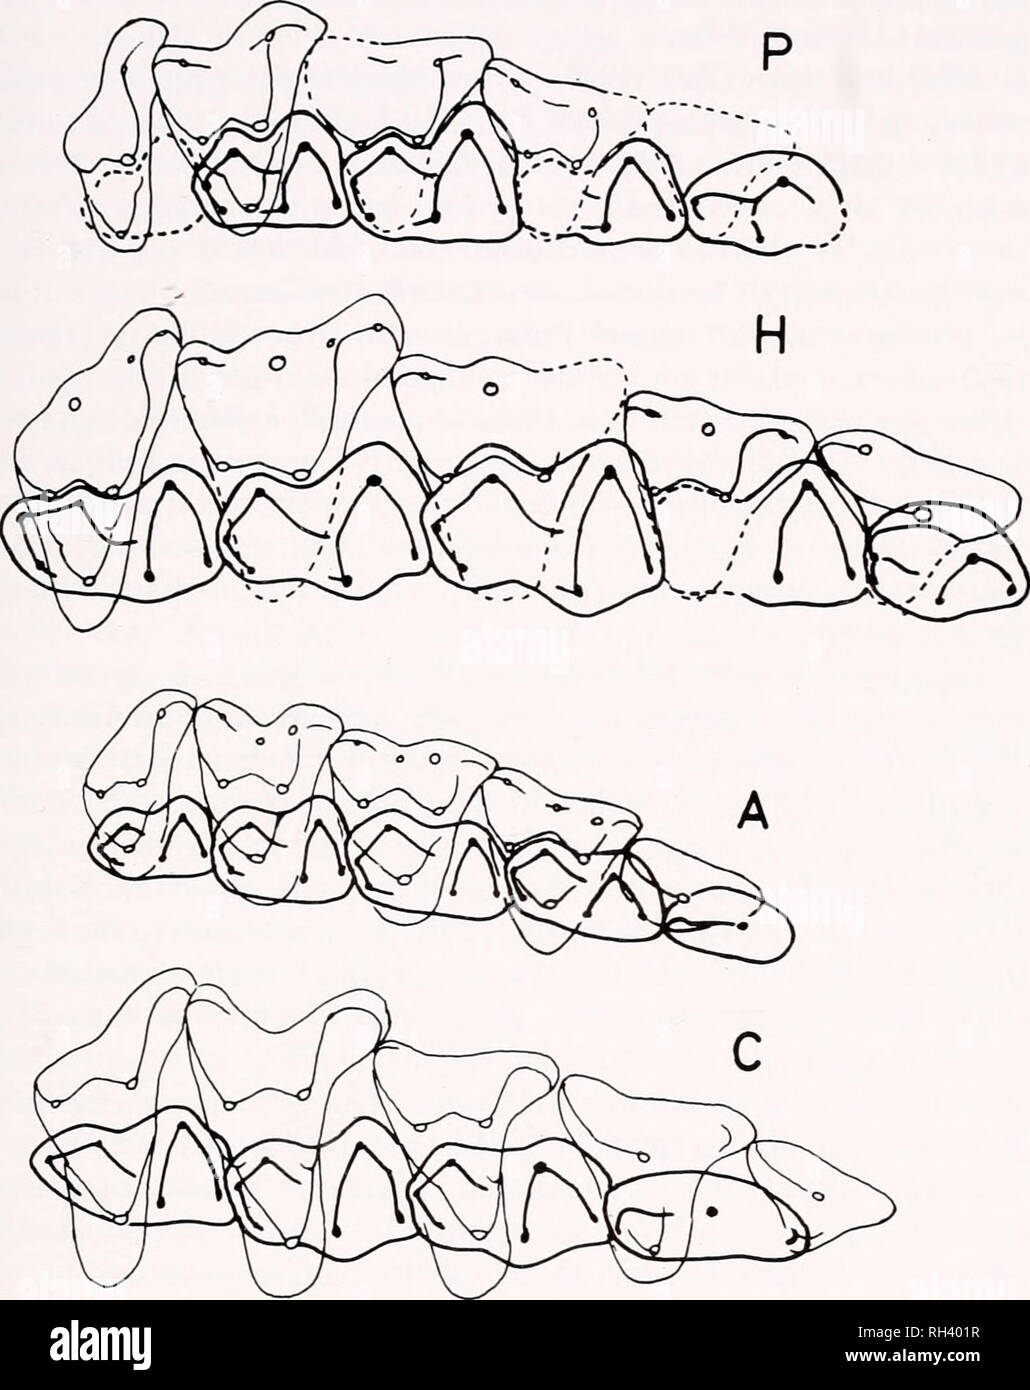 . Breviora. 1978 MAMMALIAN TEETH OF TRIBOSPHENIC PATTERN 19. Figure 5. Reconstructions of cheek teeth in occlusion. P. Pappotherium patter- soni; H, Holoclemensia texana; A, Alphadon marshi (a marsupial); C, Cimolesles incisus (a placental). Specimens used in the reconstruction of Pappotherium: M', PM 999; M^ PM 894; M3 and M^ the holotype; P4, SMP-SMU 62399; M,, PM 930; M2, PM 965; Ms, PM 948. Specimens used in the reconstruction of Holoclemensia: P*, SMP-SMU 61948; M'. PM 1000; M2, PM 886; M'. the holotype; M^ the paratype; P4, SMP-SMU 61947; M,, PM 966; M2, PM 1005; Mj, SMP-SMU 61727; M4, S Stock Photo